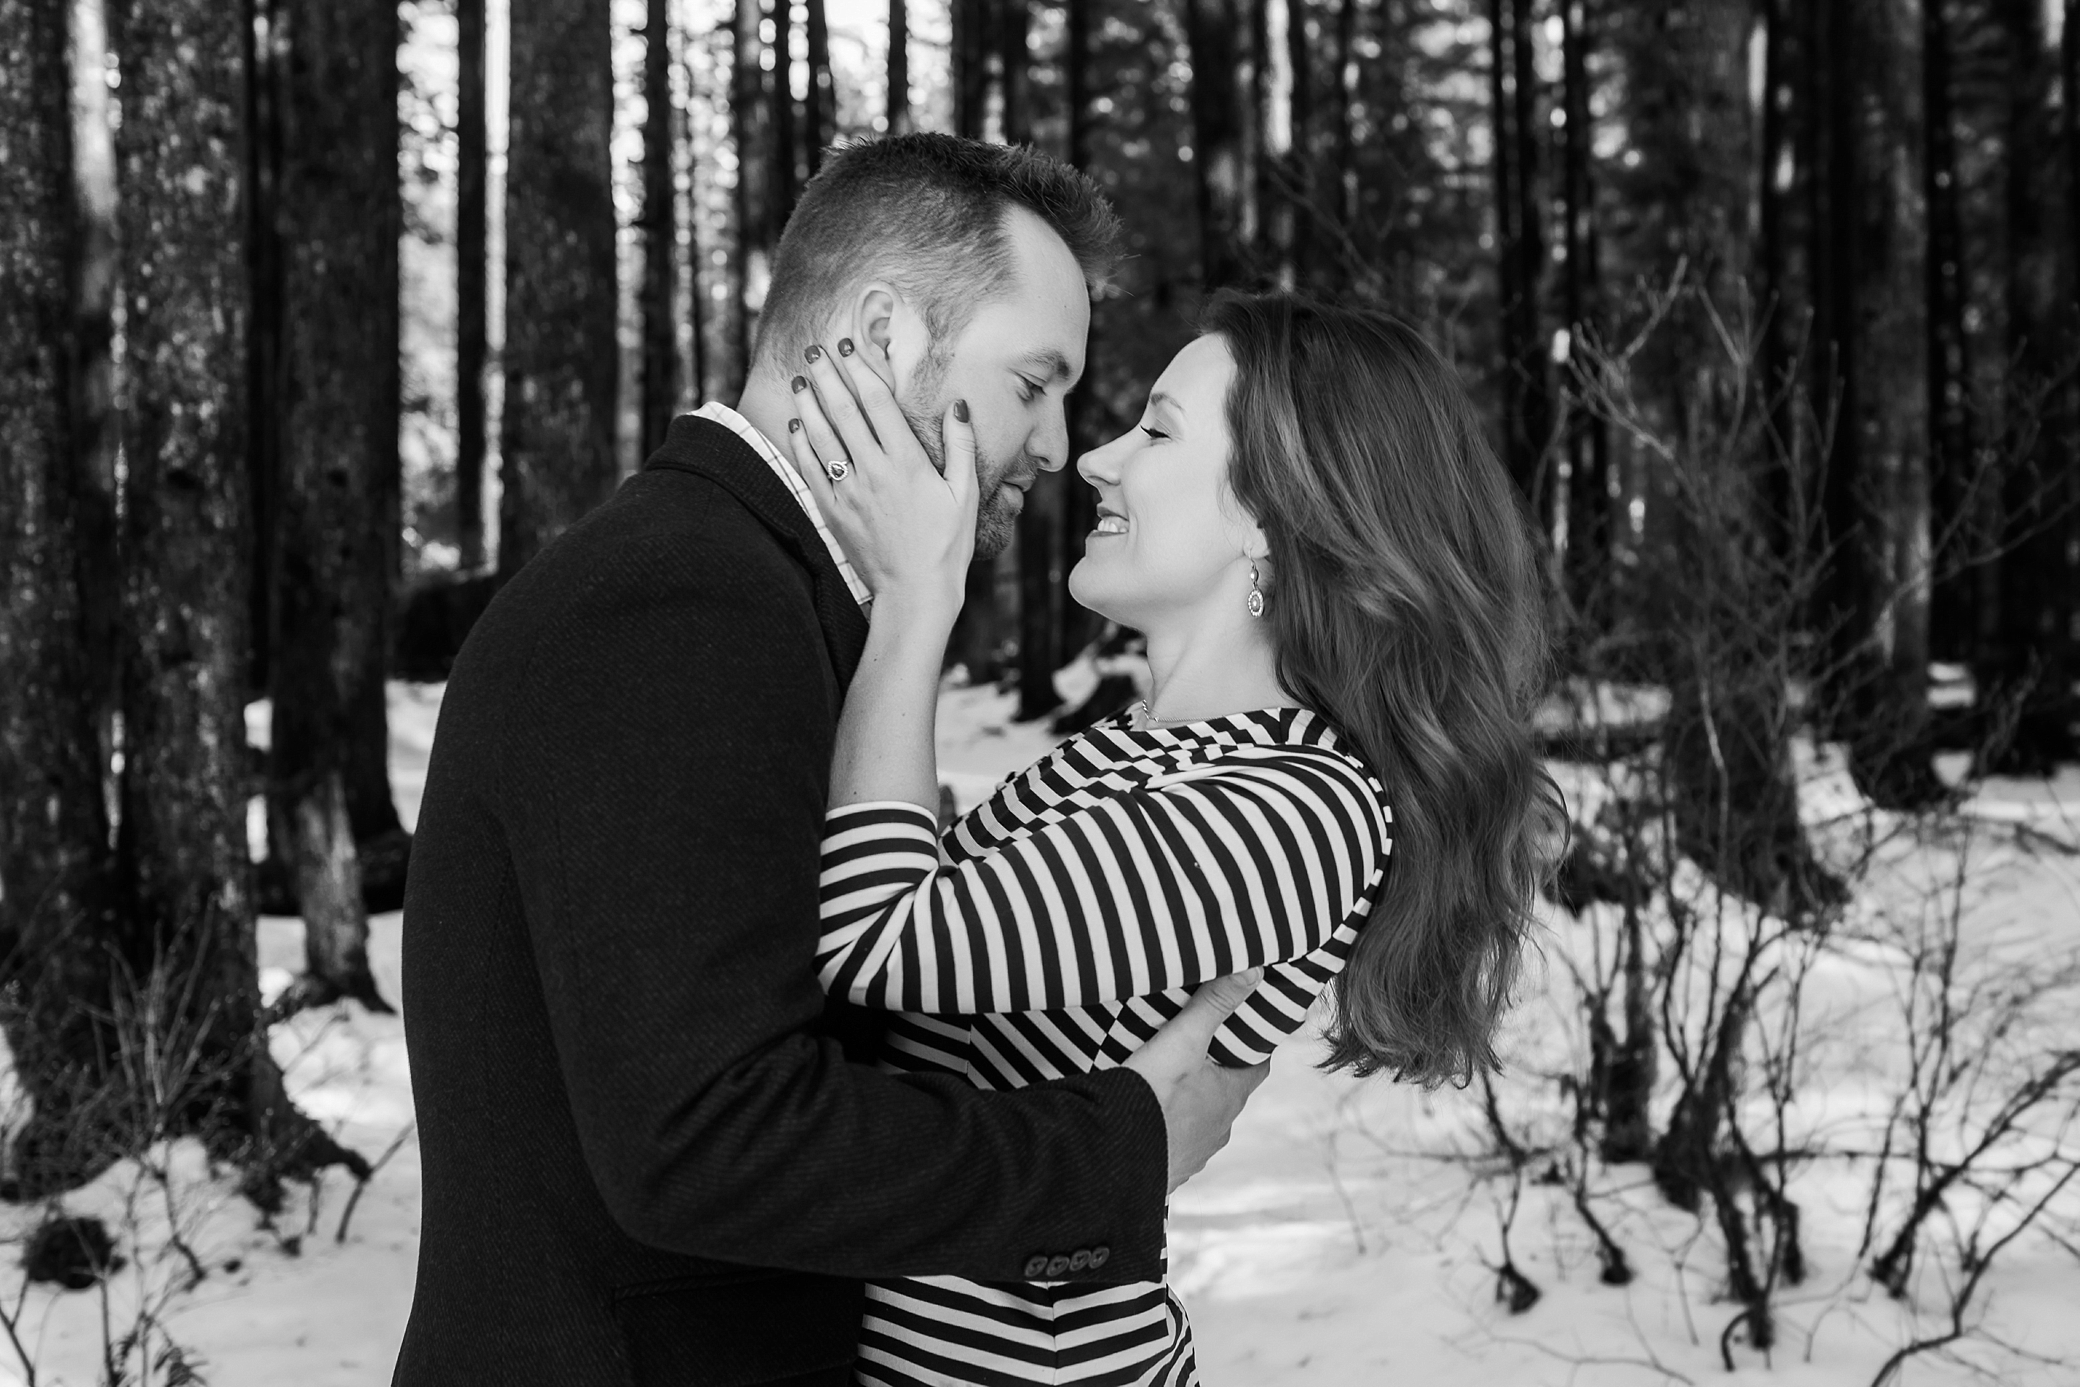 Kissing in the snow | Megan Montalvo Photography